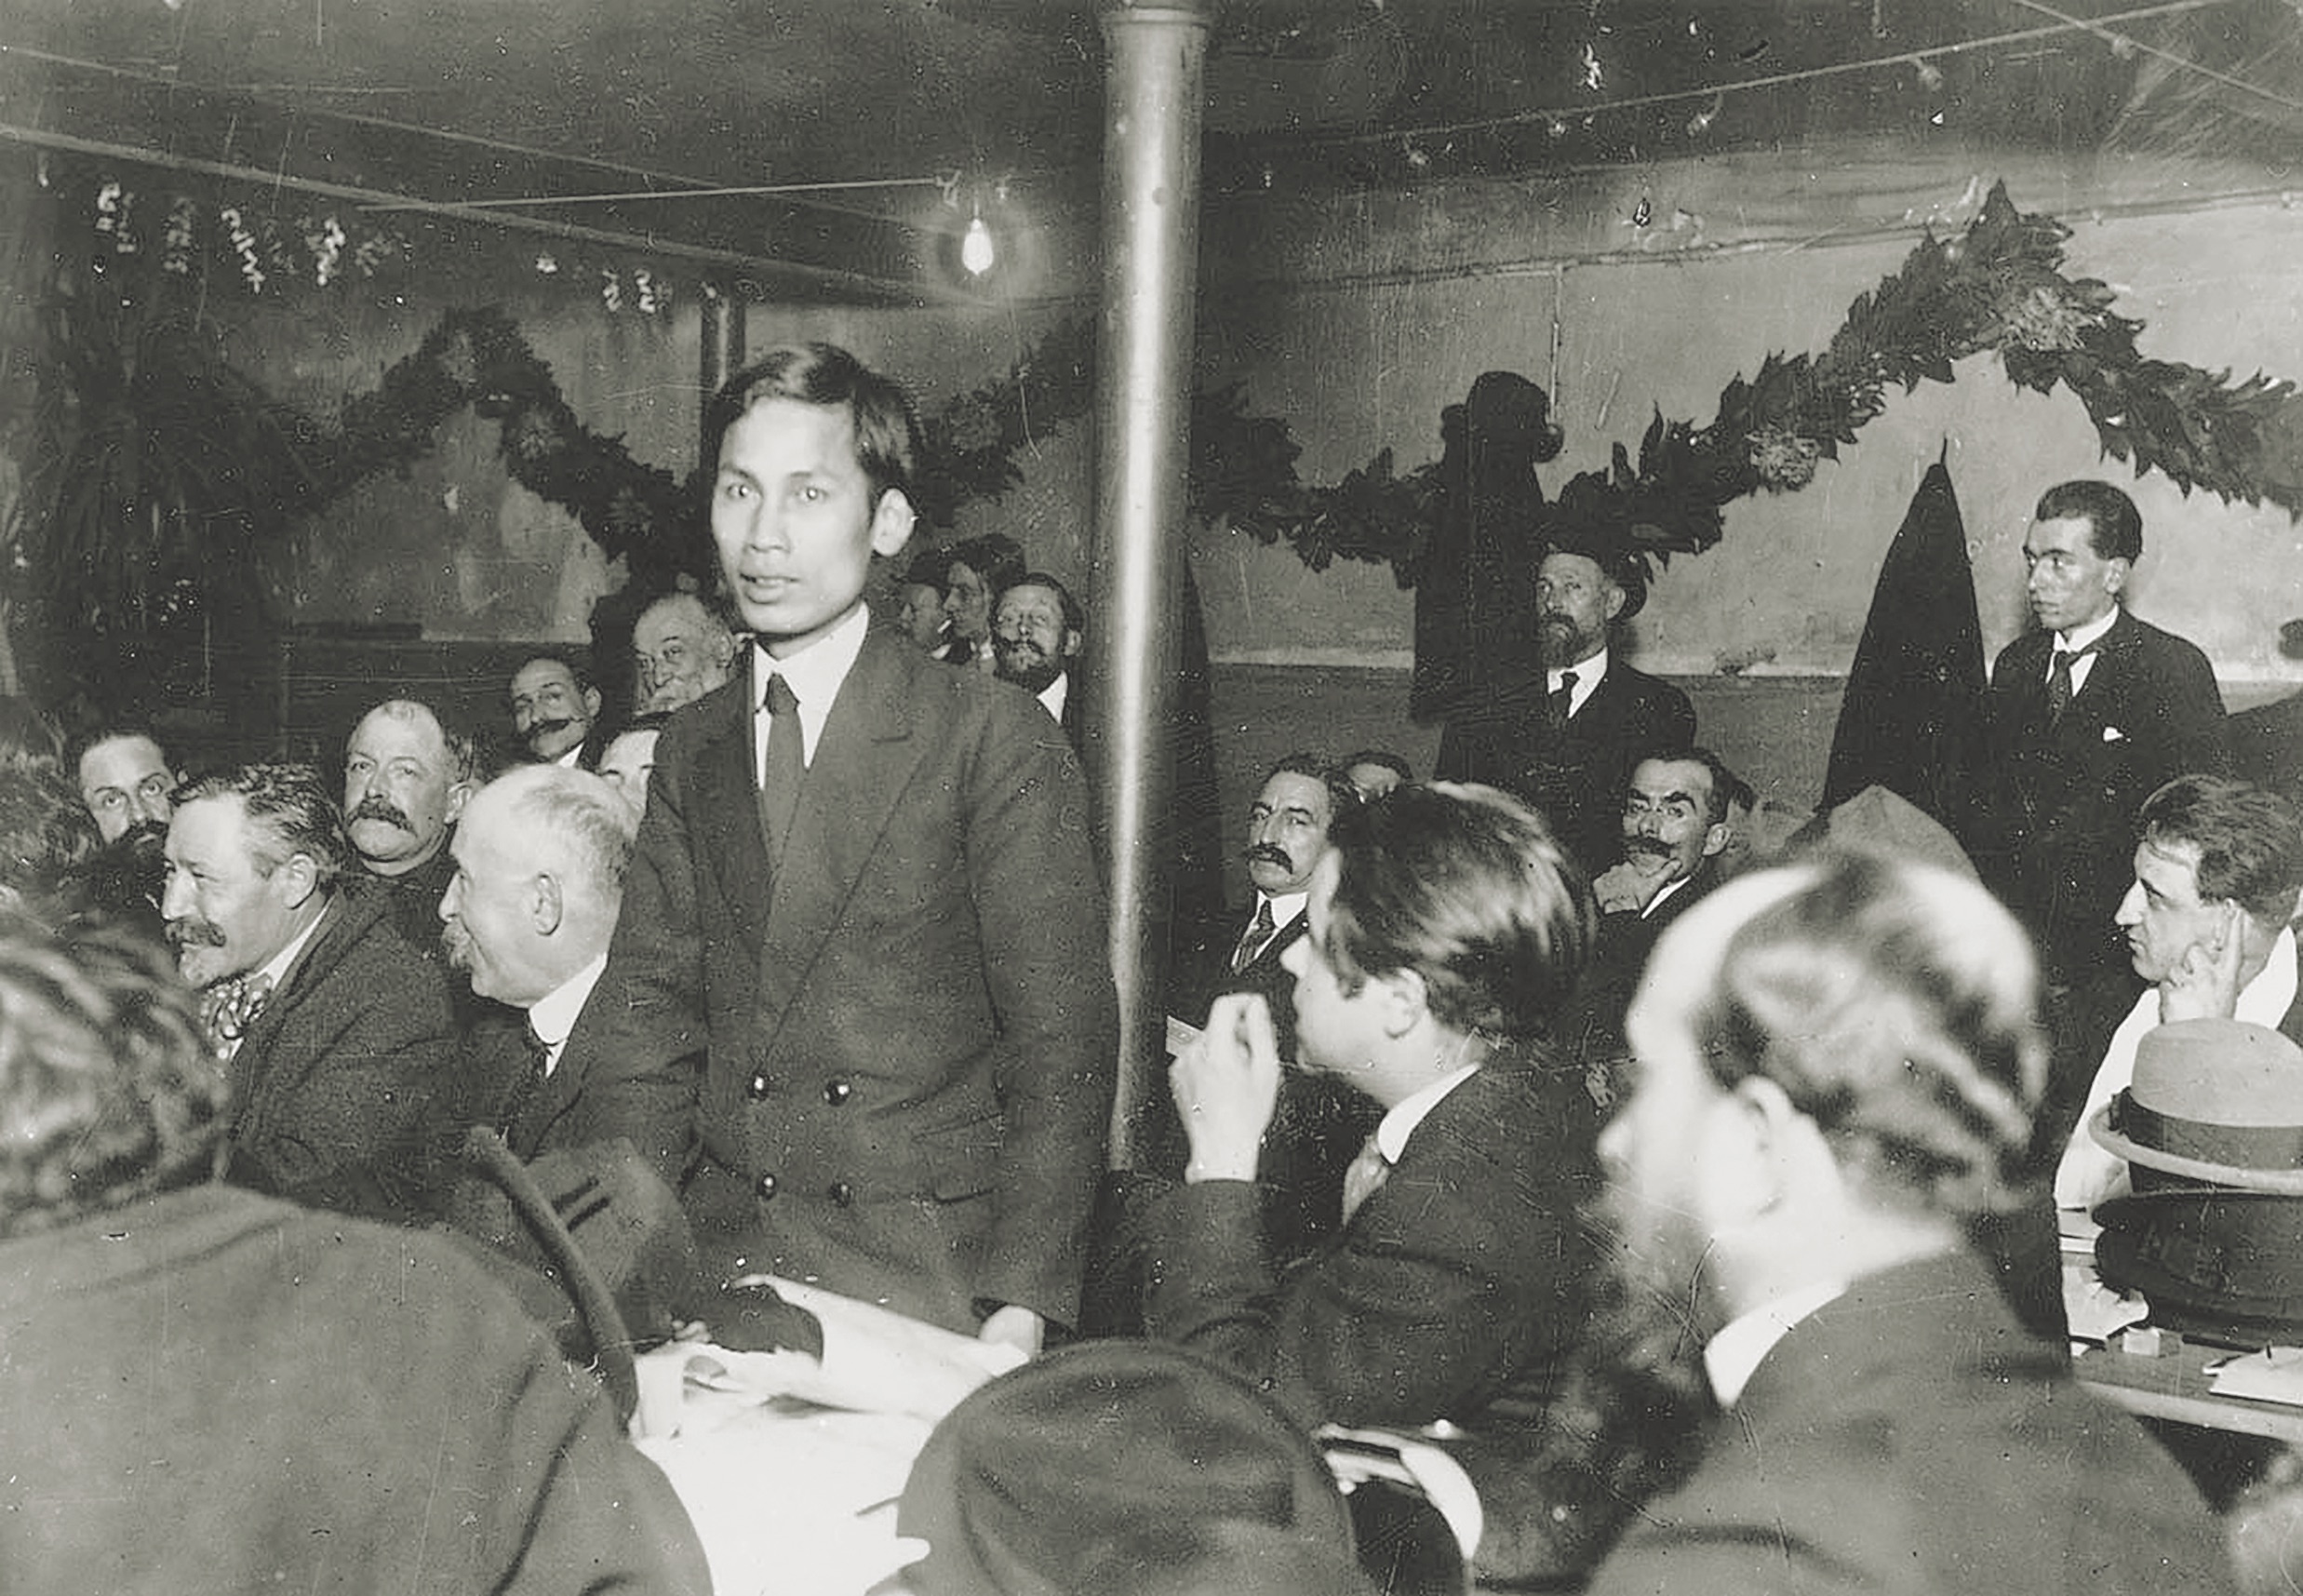 Ho addresses the founding meeting of the French Communist Party at Tours in December 1920. He felt the communist philosophy aligned with his nationalist aspirations. (AFP/Agence France Presse)